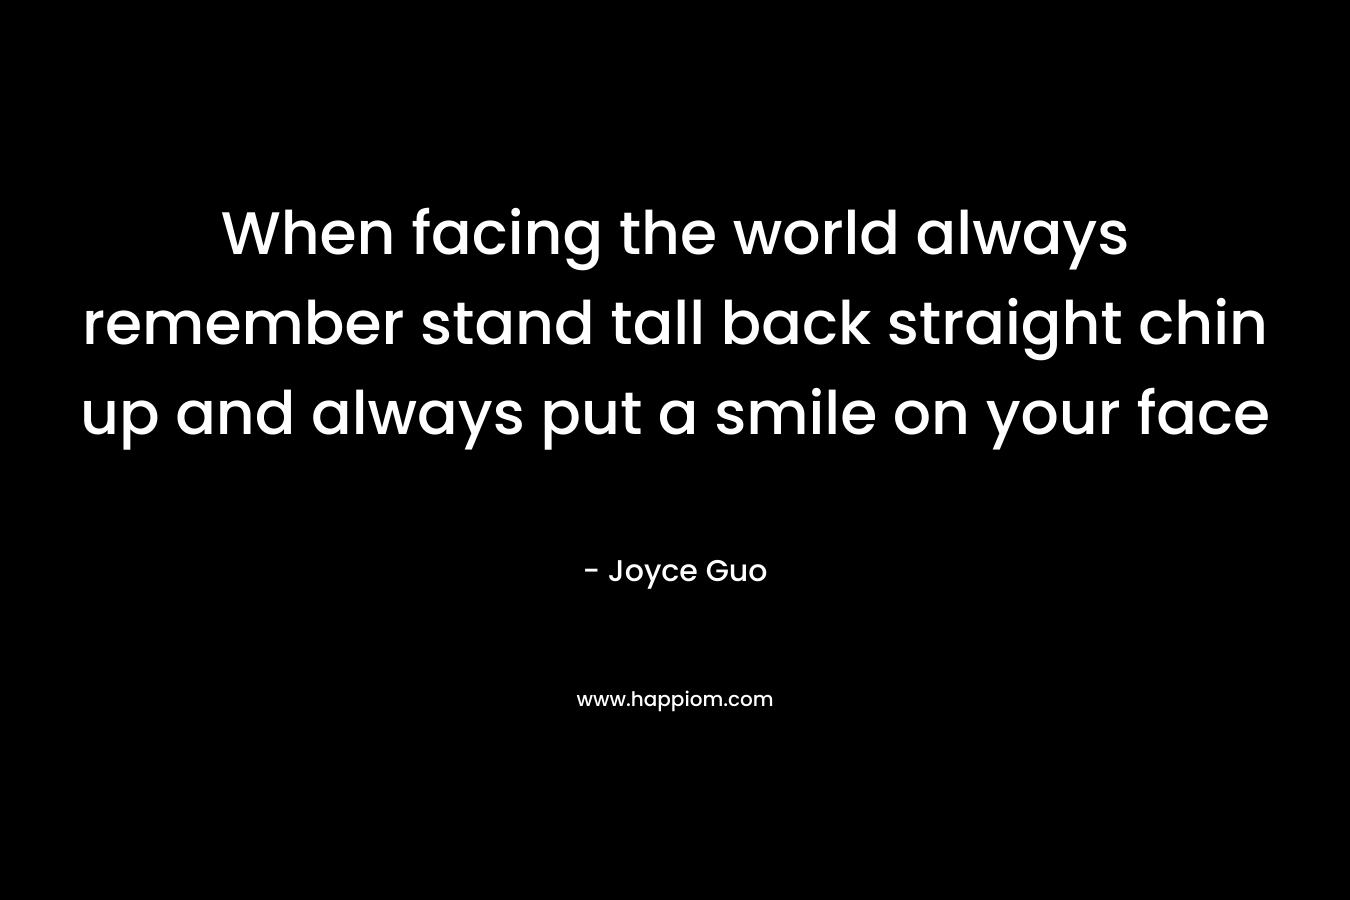 When facing the world always remember stand tall back straight chin up and always put a smile on your face